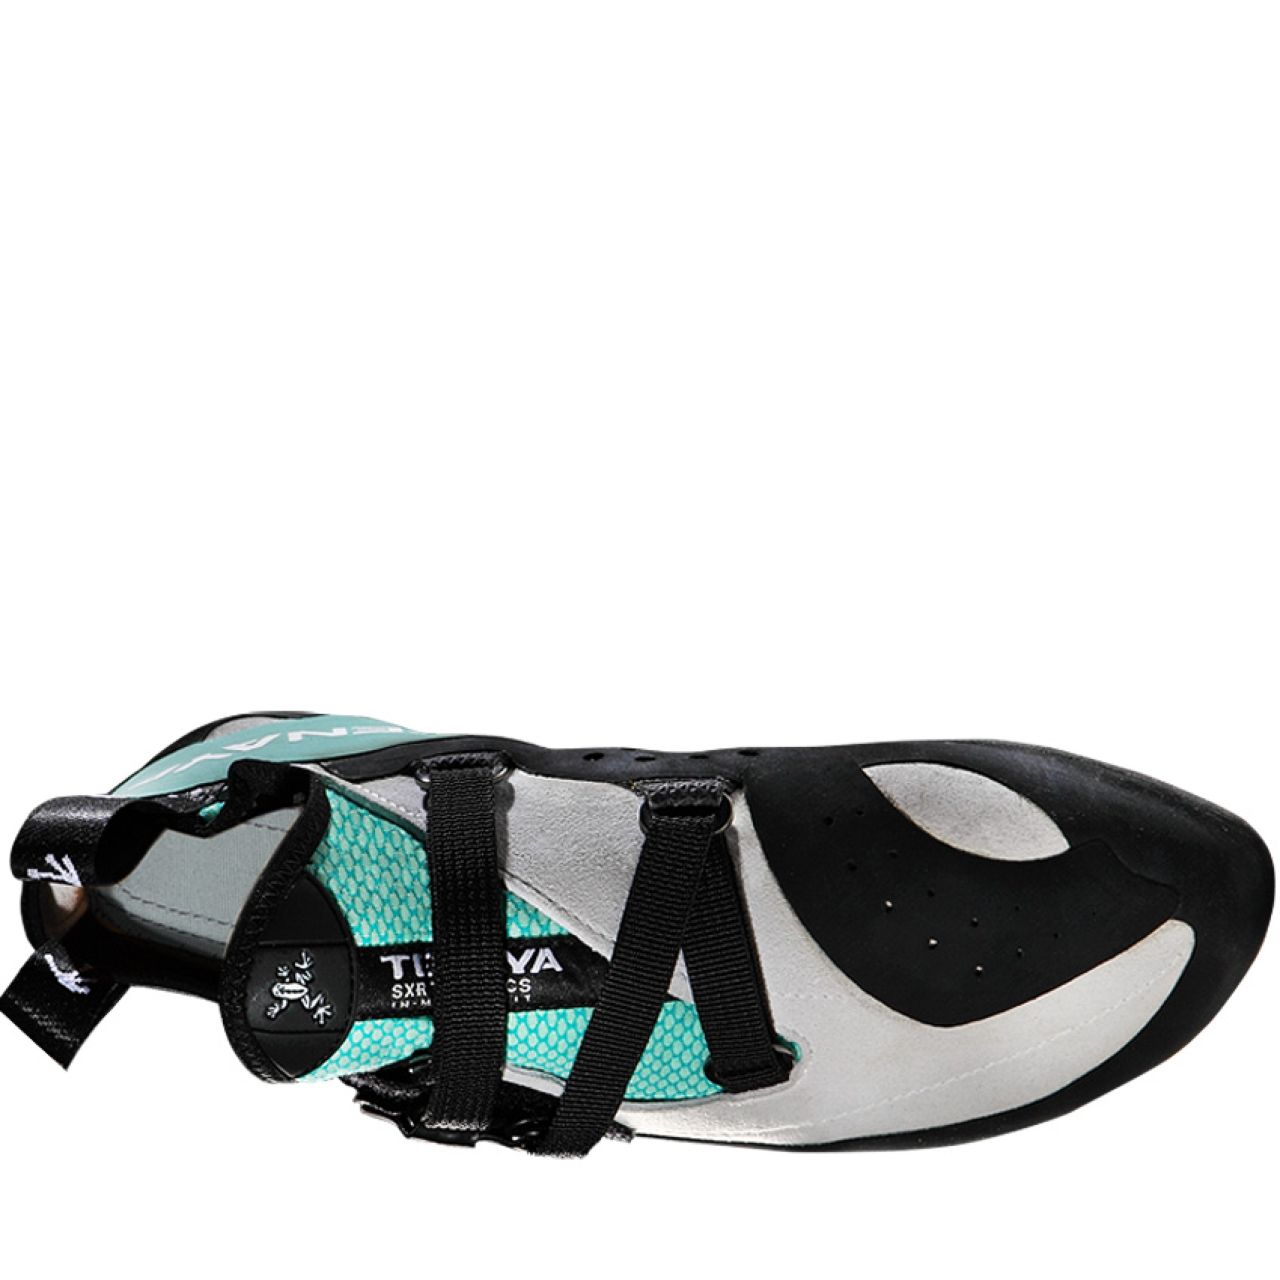 So iLL The Street LV - Climbing shoes, Free EU Delivery